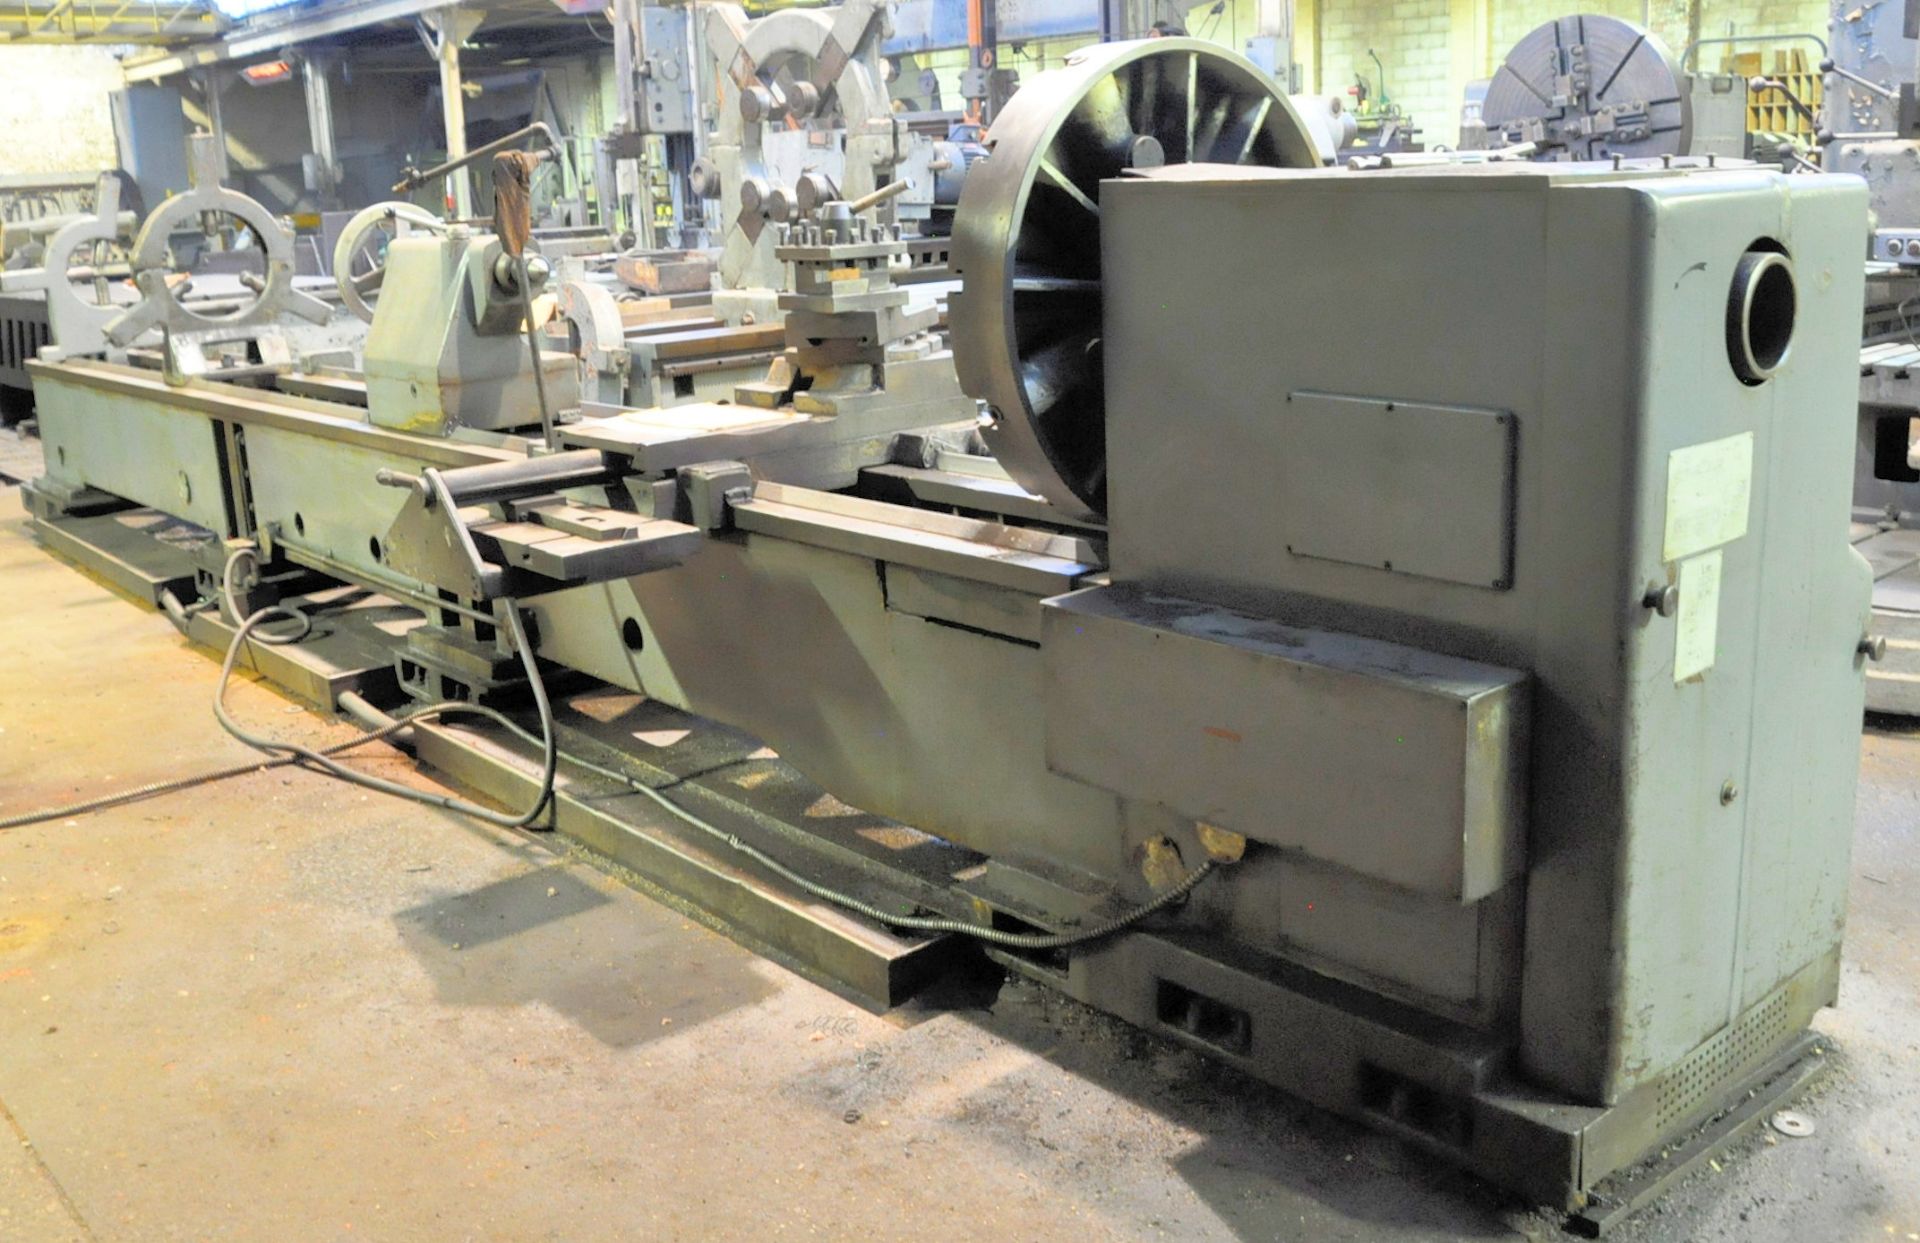 Sirco Model PA-36 36" X 240" Gap Bed Engine Lathe, S/N 511, 34" 4-Jaw Chuck, Tool post, (2) Steady - Image 8 of 9